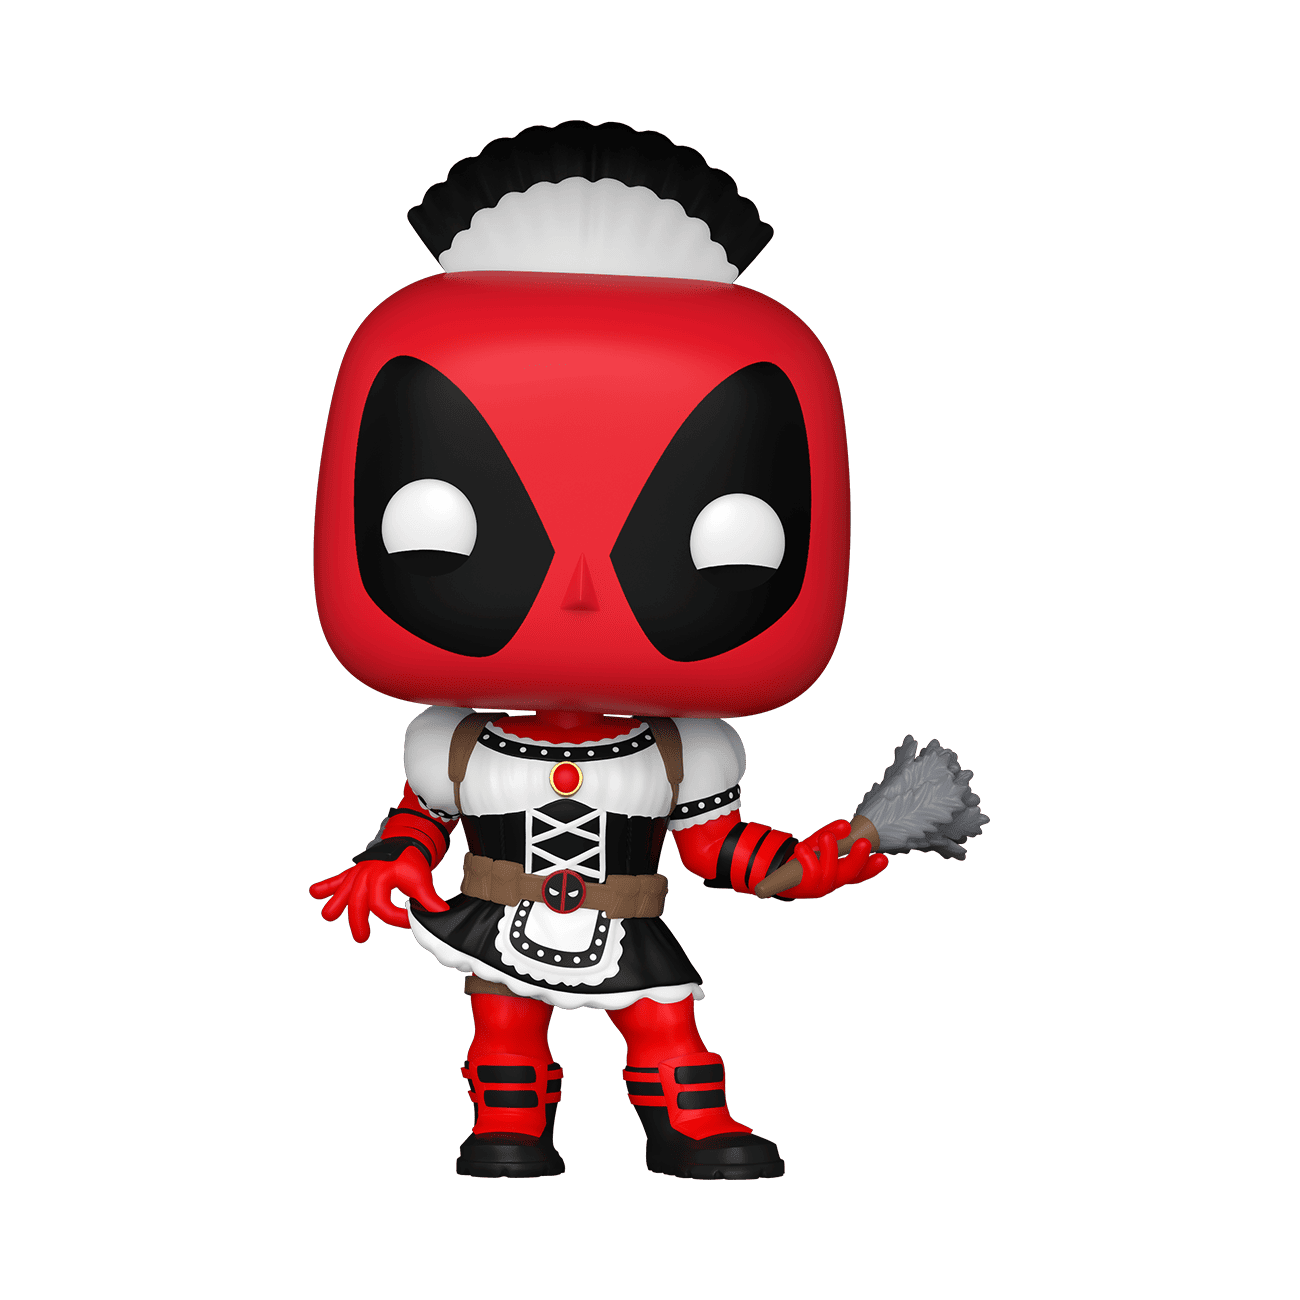  Funko Pop! Marvel: Deadpool as French Maid #688 Shop Limited  Edition Exclusive : Toys & Games